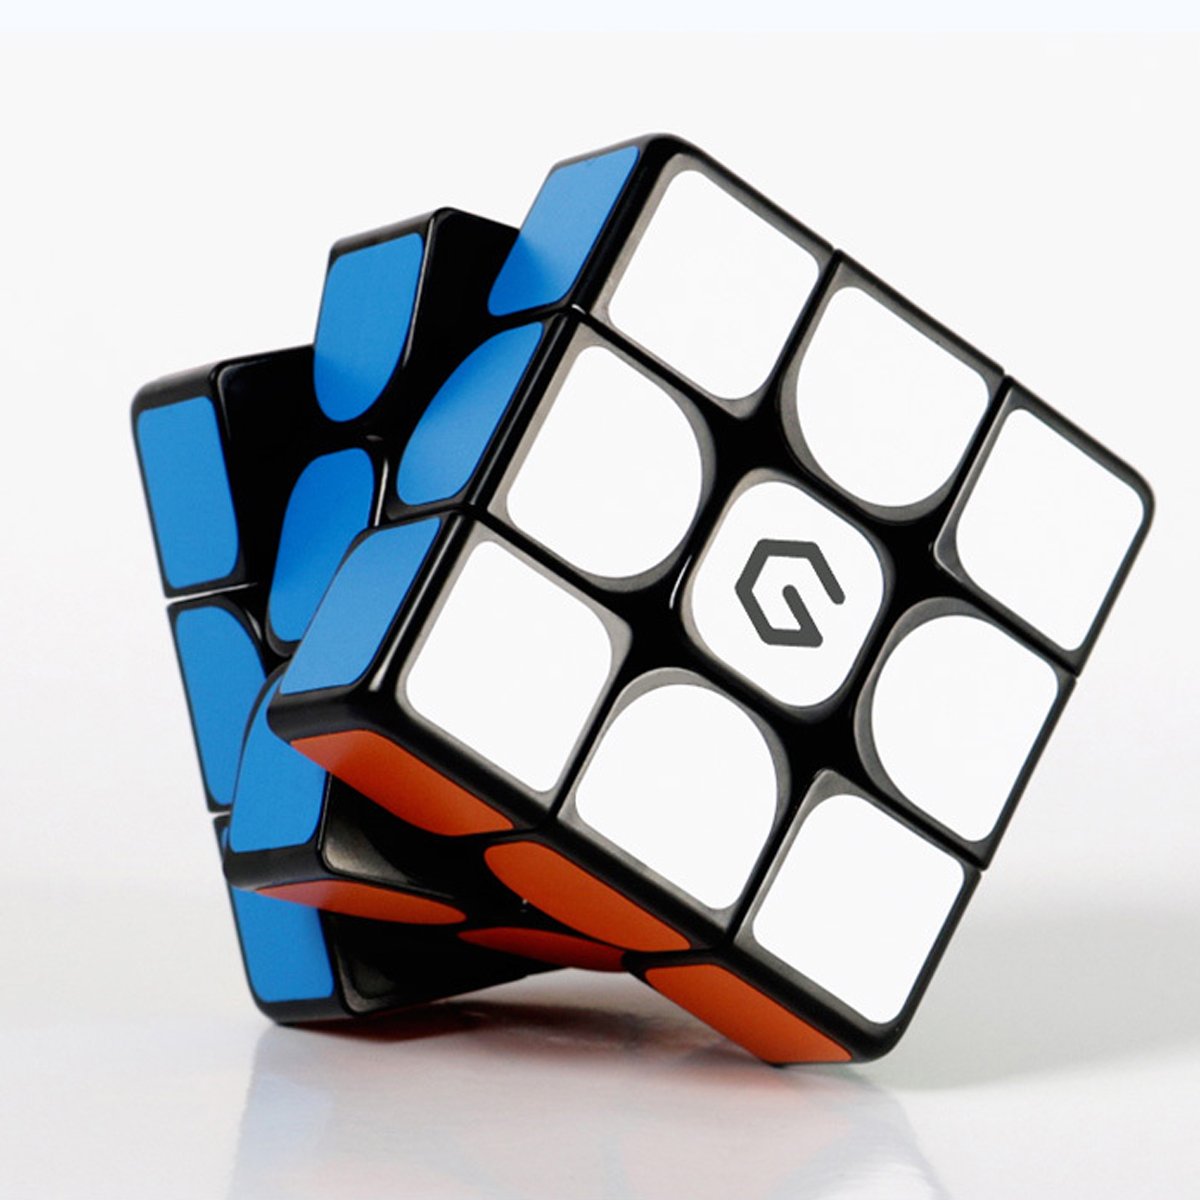 Xiaomi Giiker M3 Magnetic Cube 3x3x3 Vivid Color Square Magic Cube Puzzle Science Education Toy Gift 1